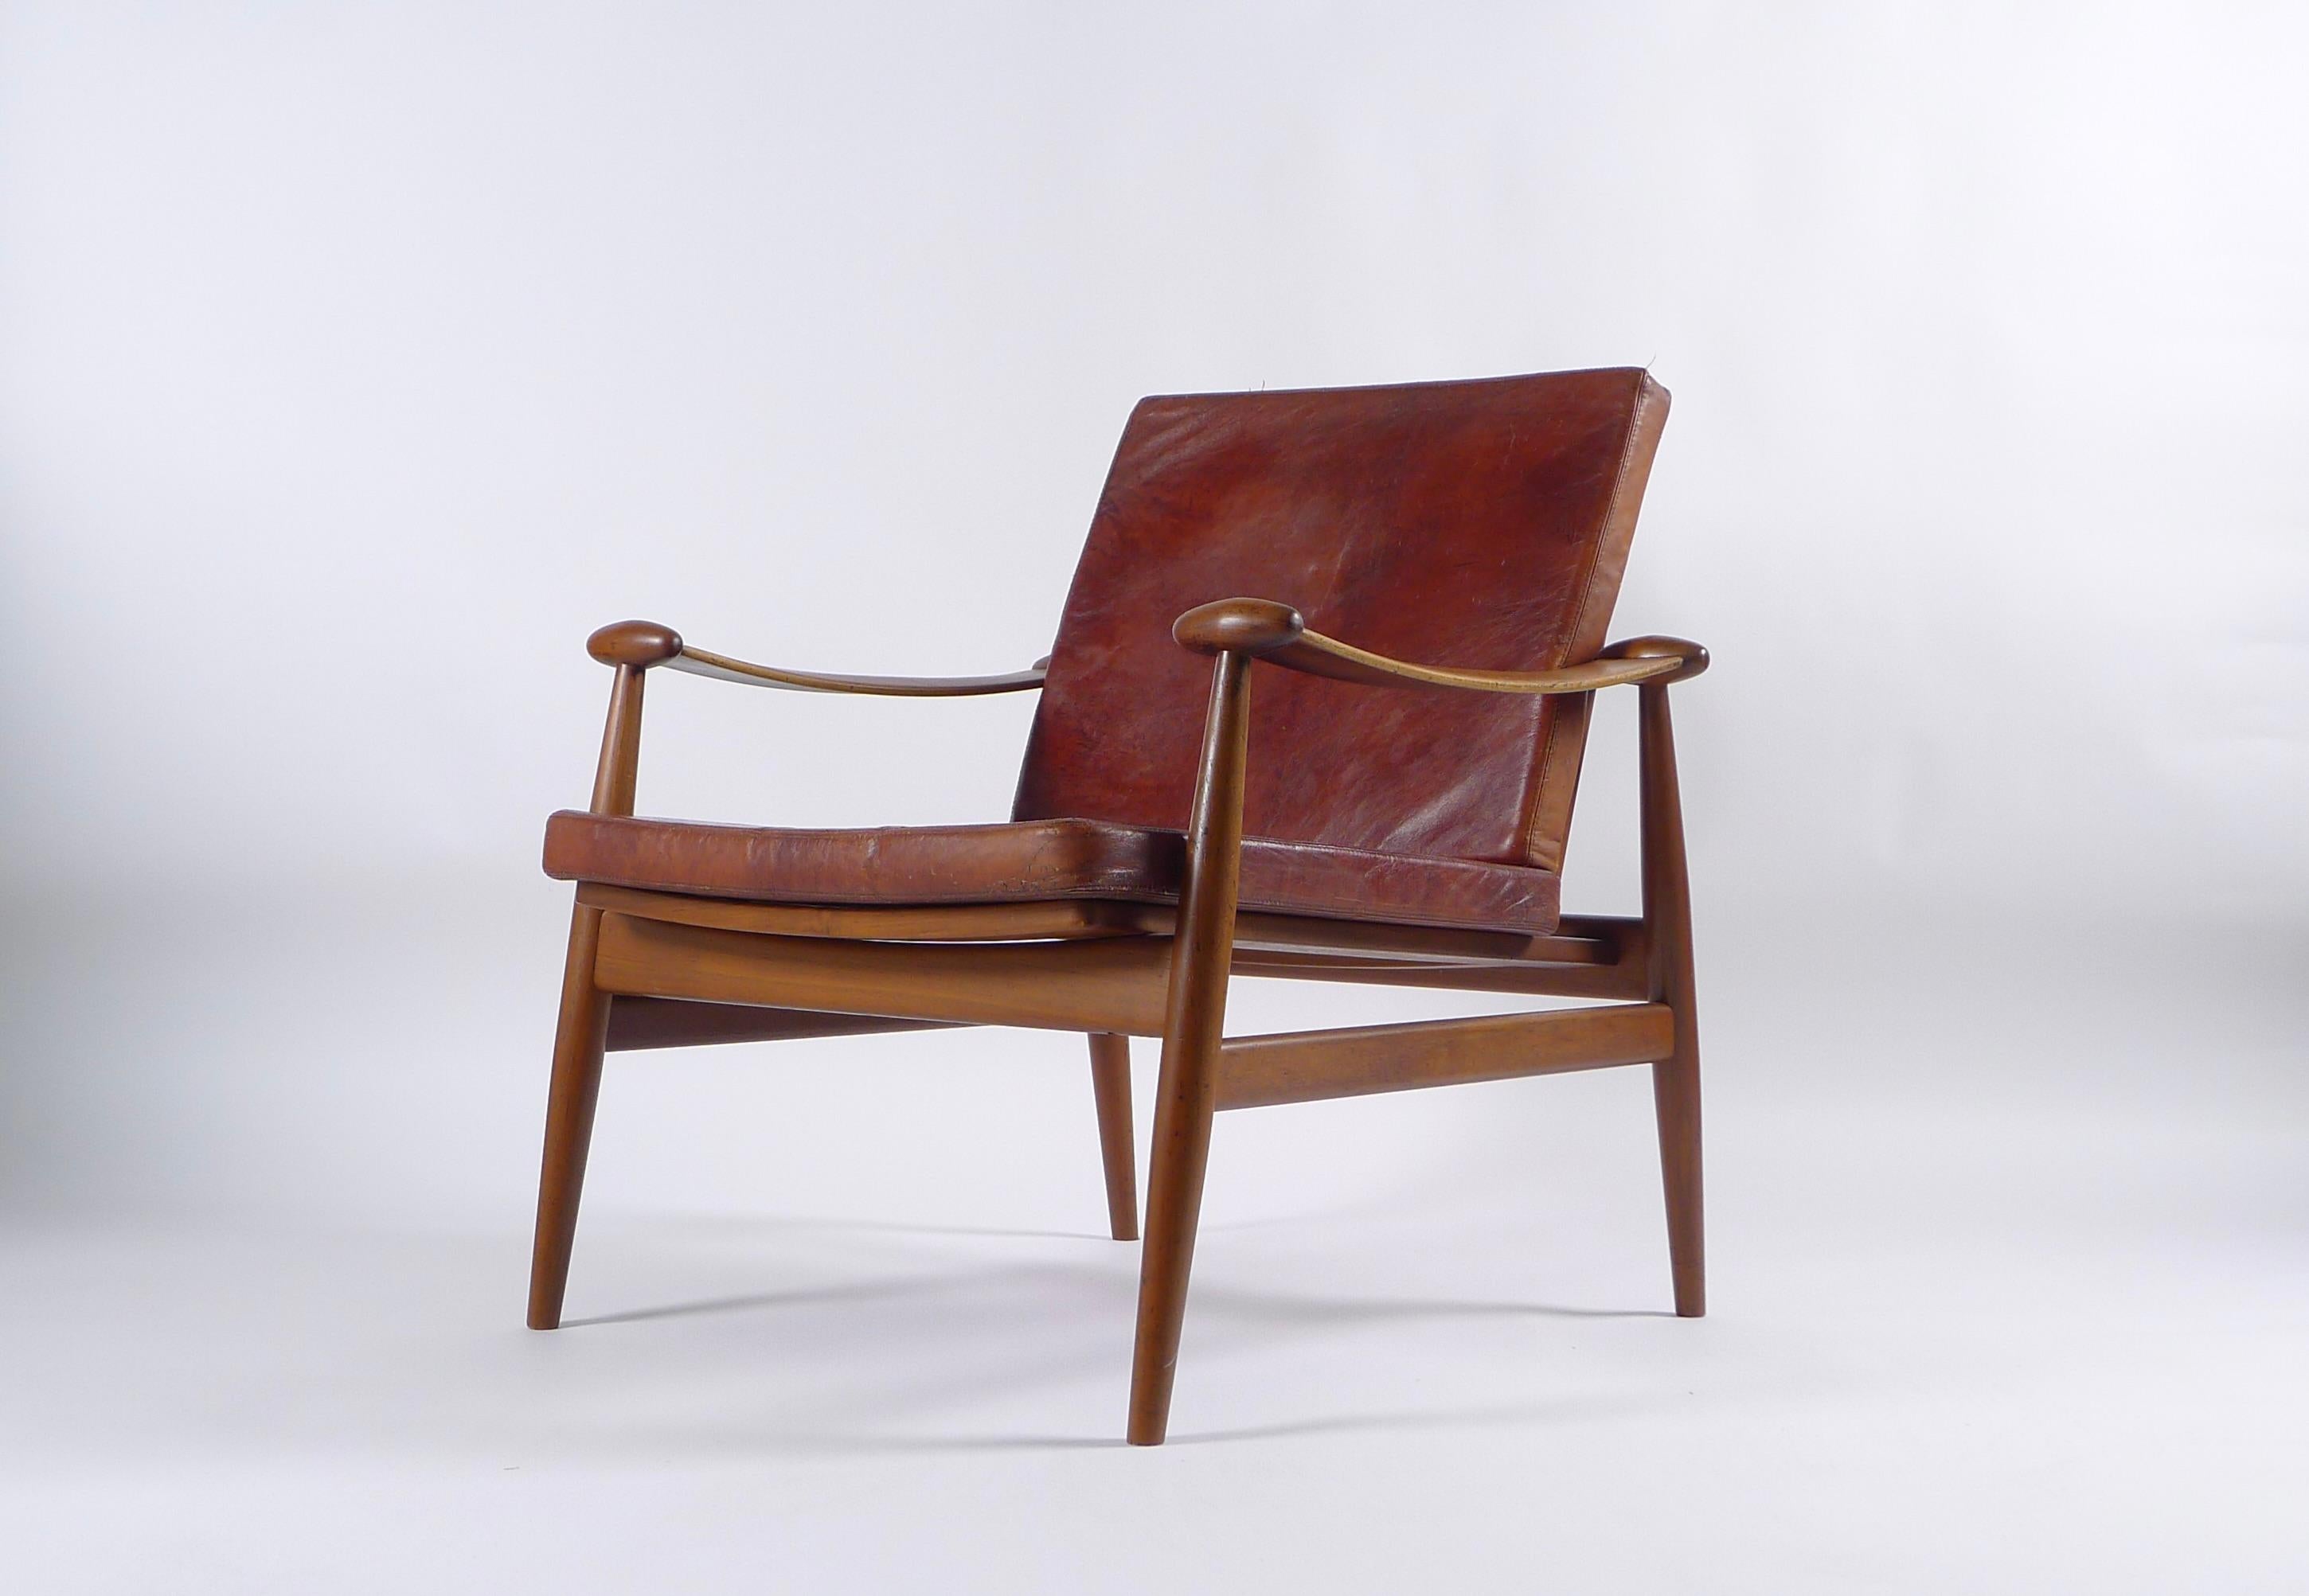 Spade lounge chair, or 'Spadestolen', model FD133, designed by Finn Juhl in 1953 and manufactured by France & Son in the 1950s. Teak framed with removable leather cushions. France & Son label

The cushions are in the original leather and are